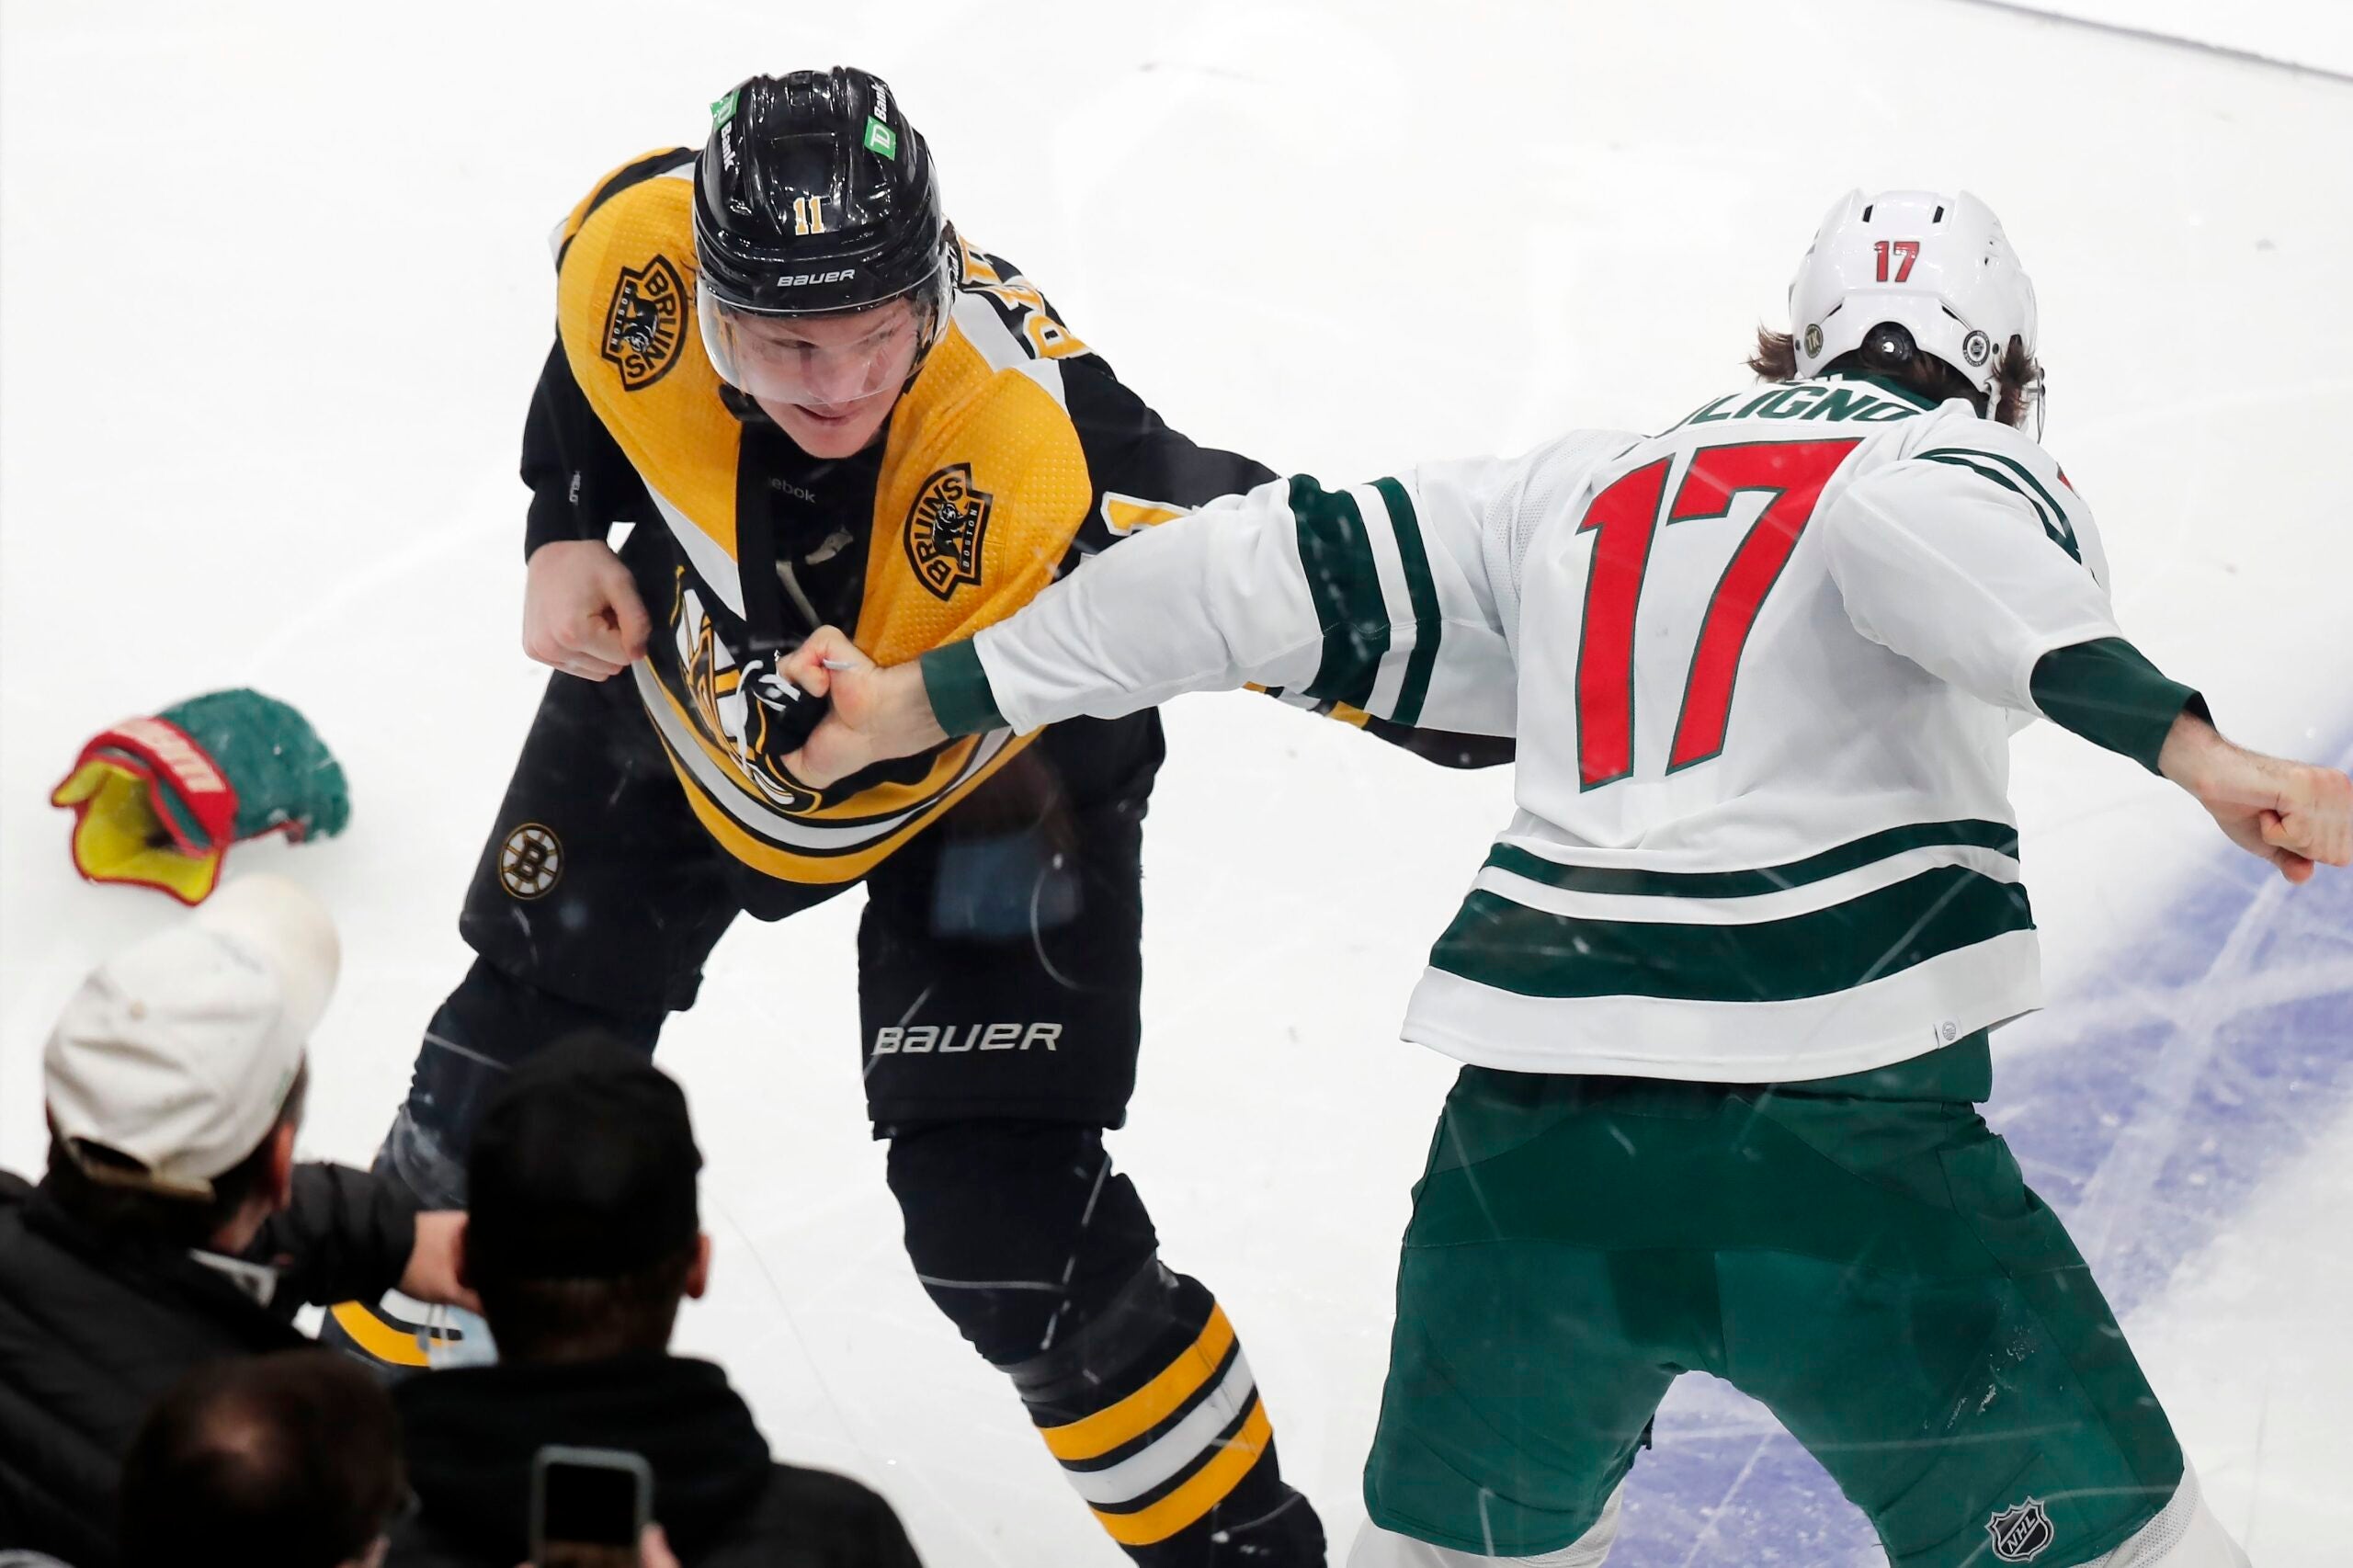 DIDIER'S TWO GOALS NOT ENOUGH AS P-BRUINS FALL TO WOLF PACK